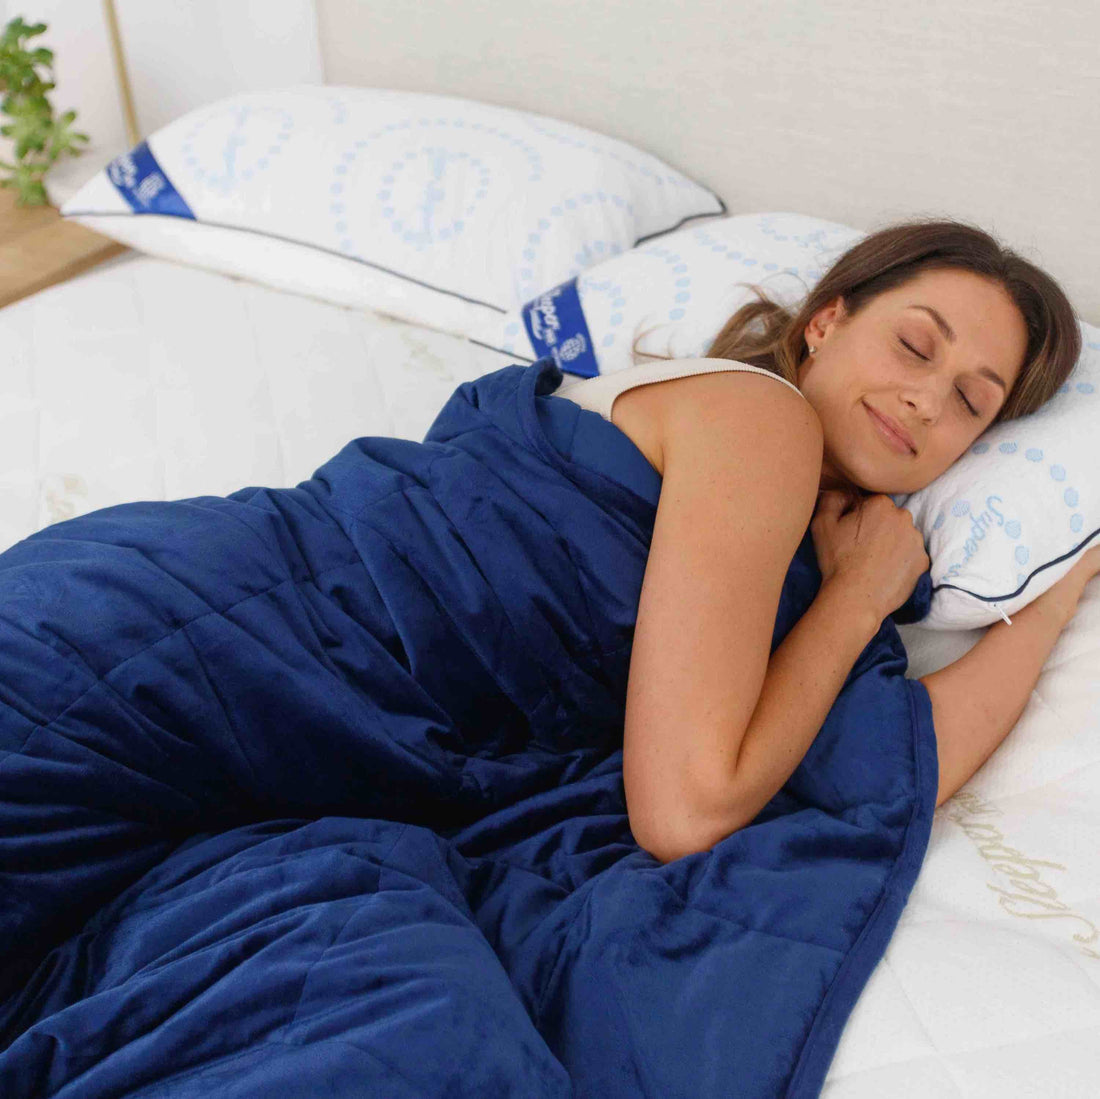 Super sleeper pro weighted blankets keeping a young woman warm while she sleeps.